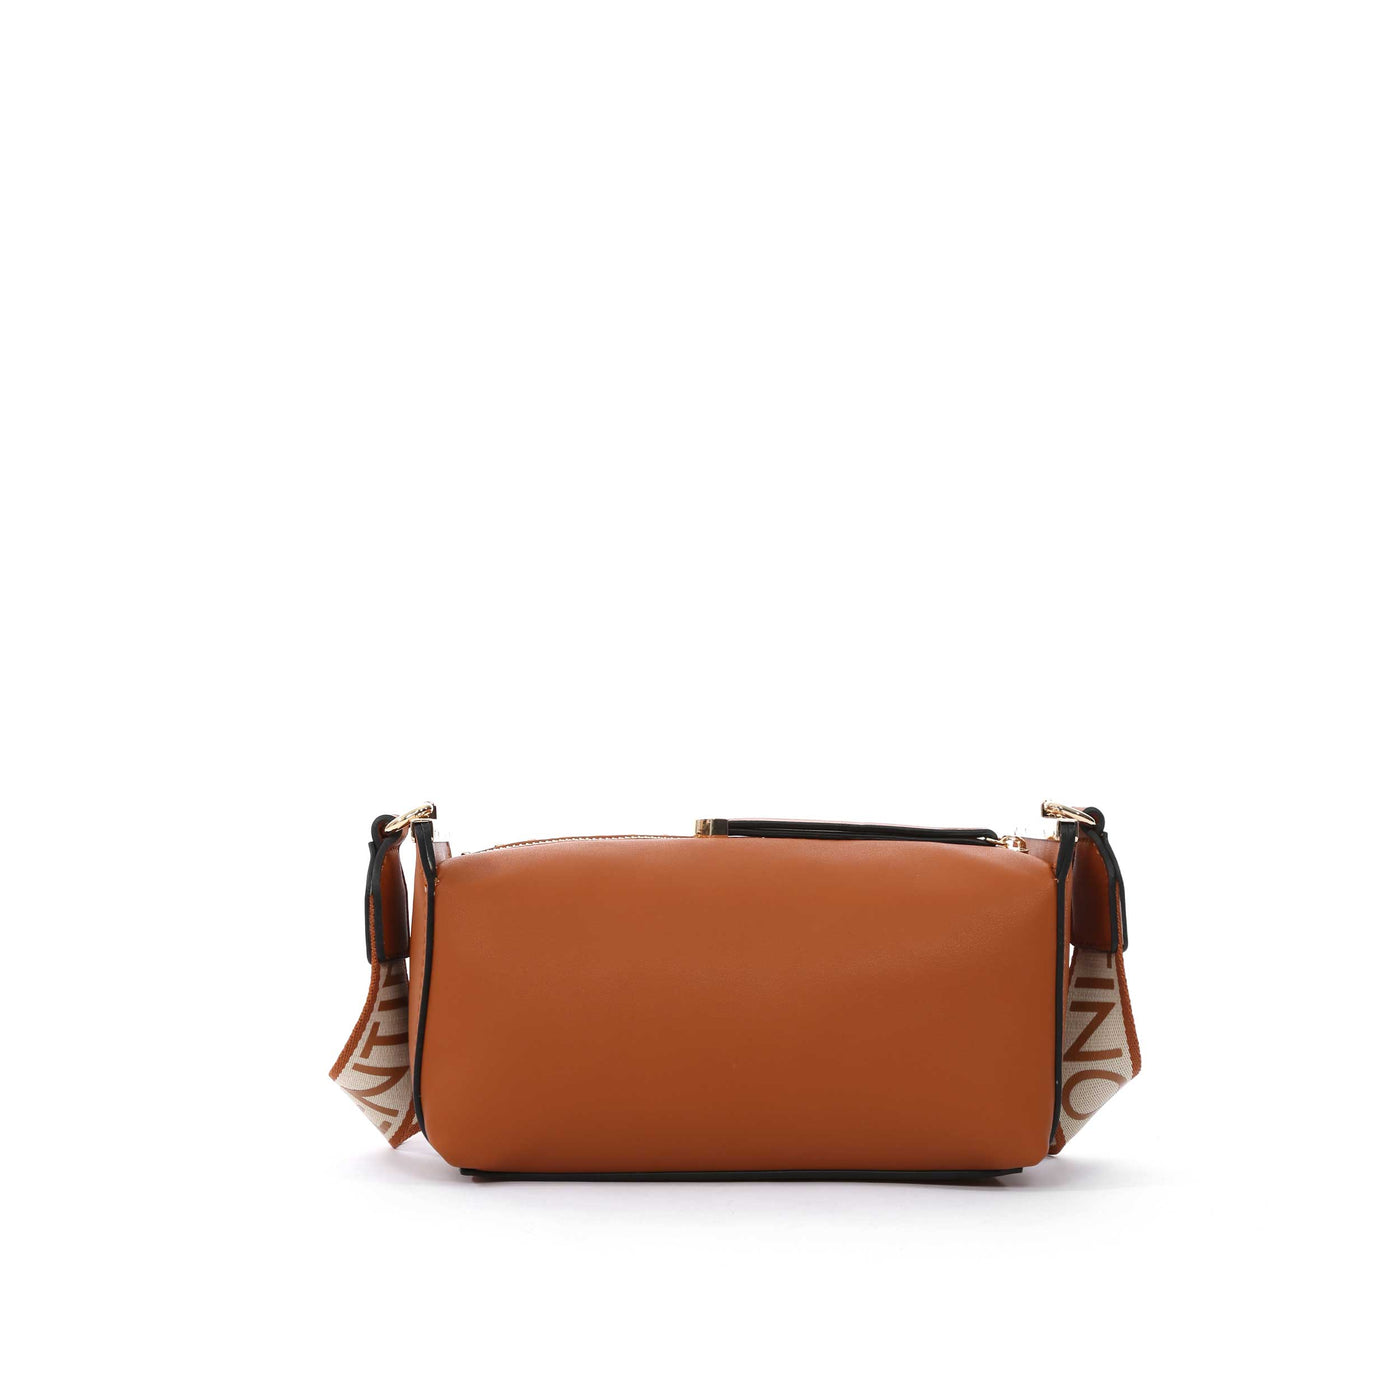 Valentino Bags Song Ladies Cross Body Bag in Cuoio Tan Back